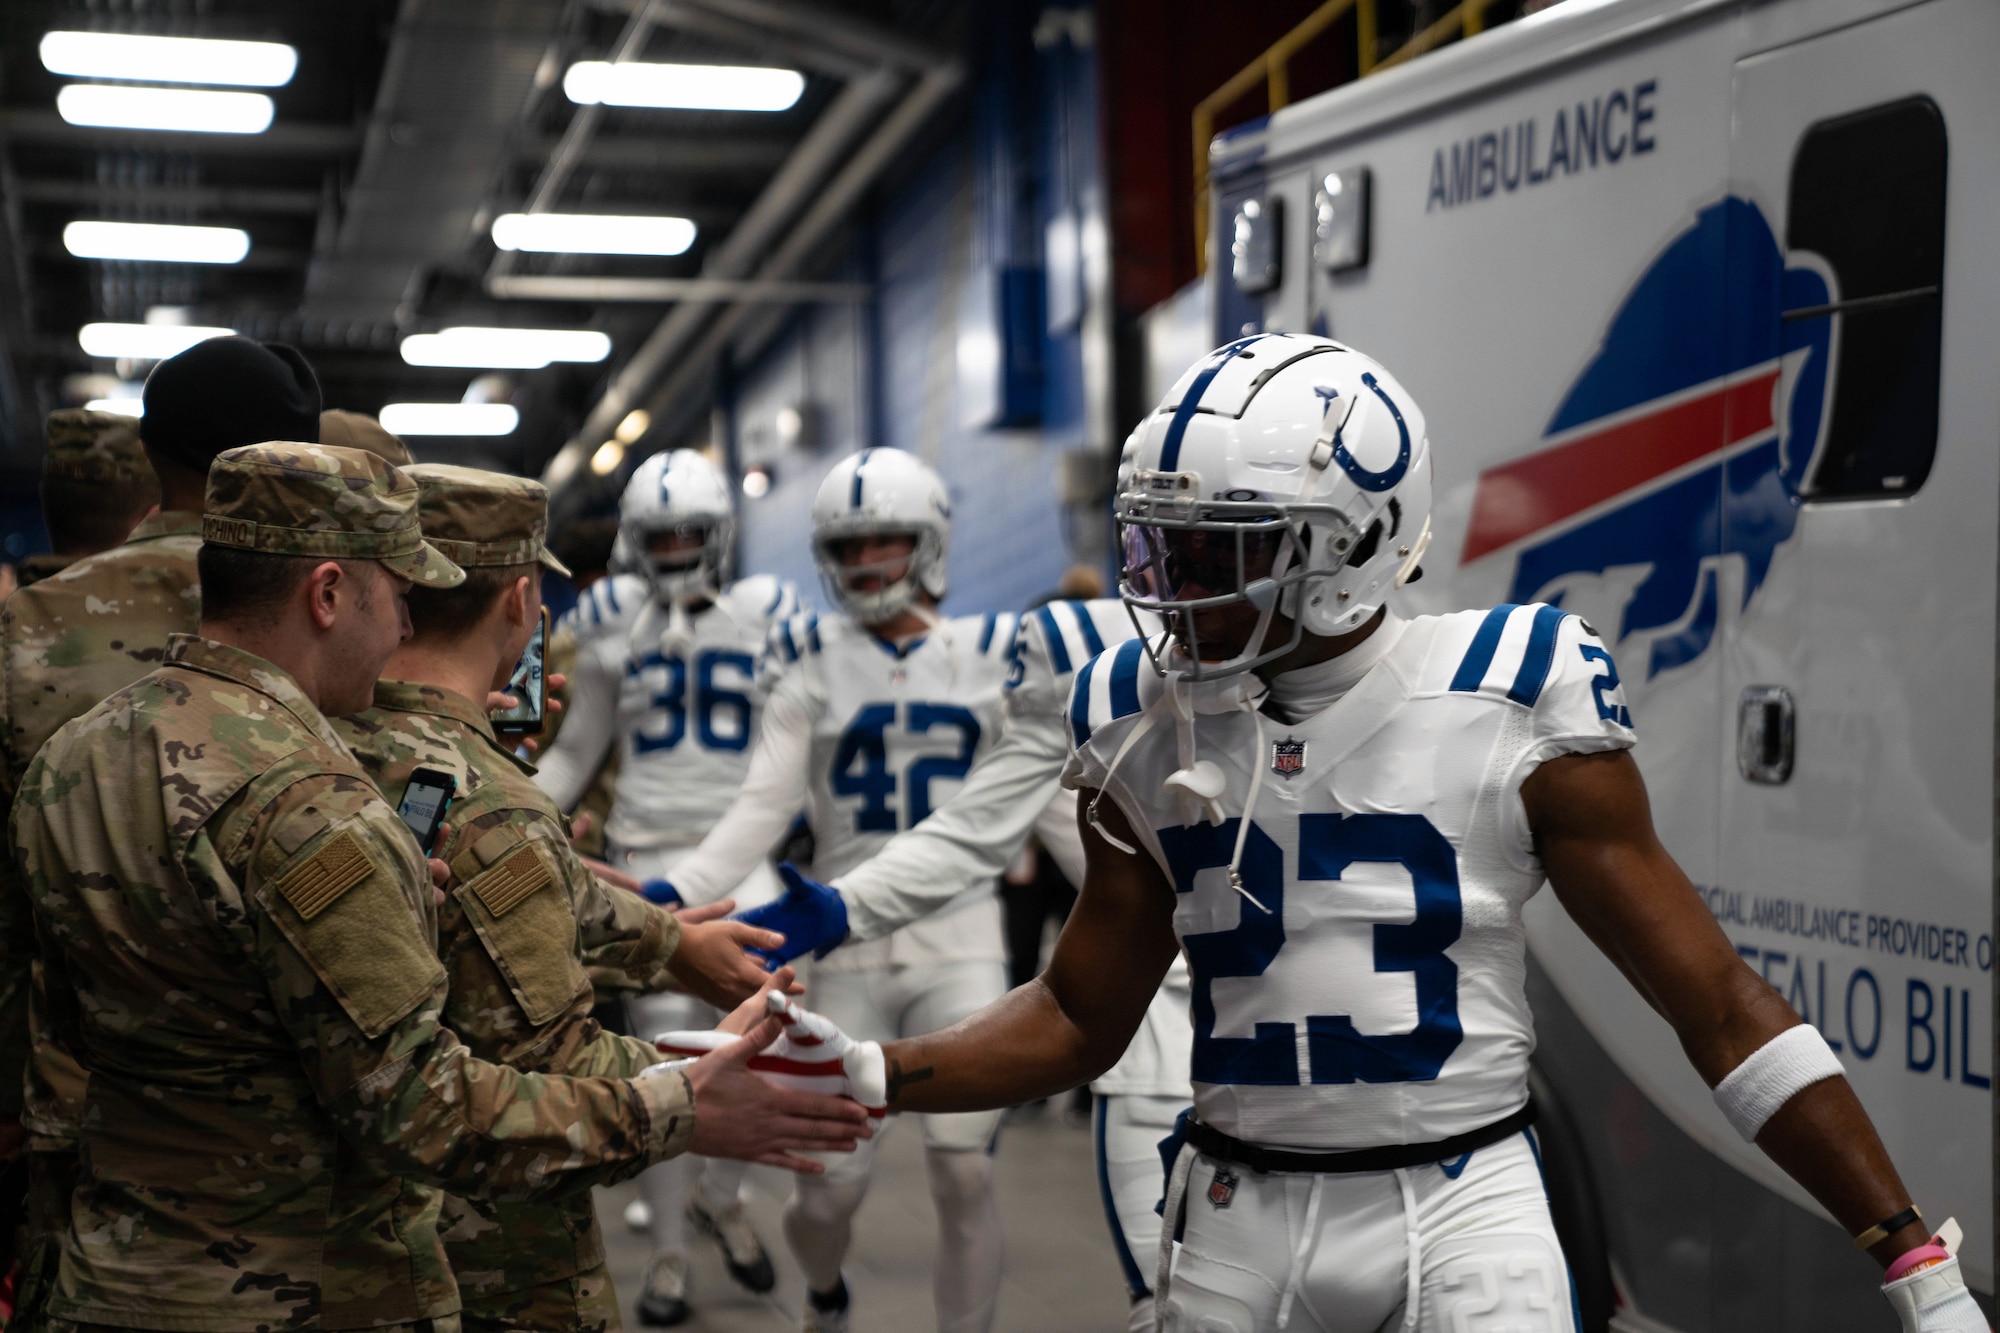 Airmen greet members of the NFL’s Indianapolis Colts